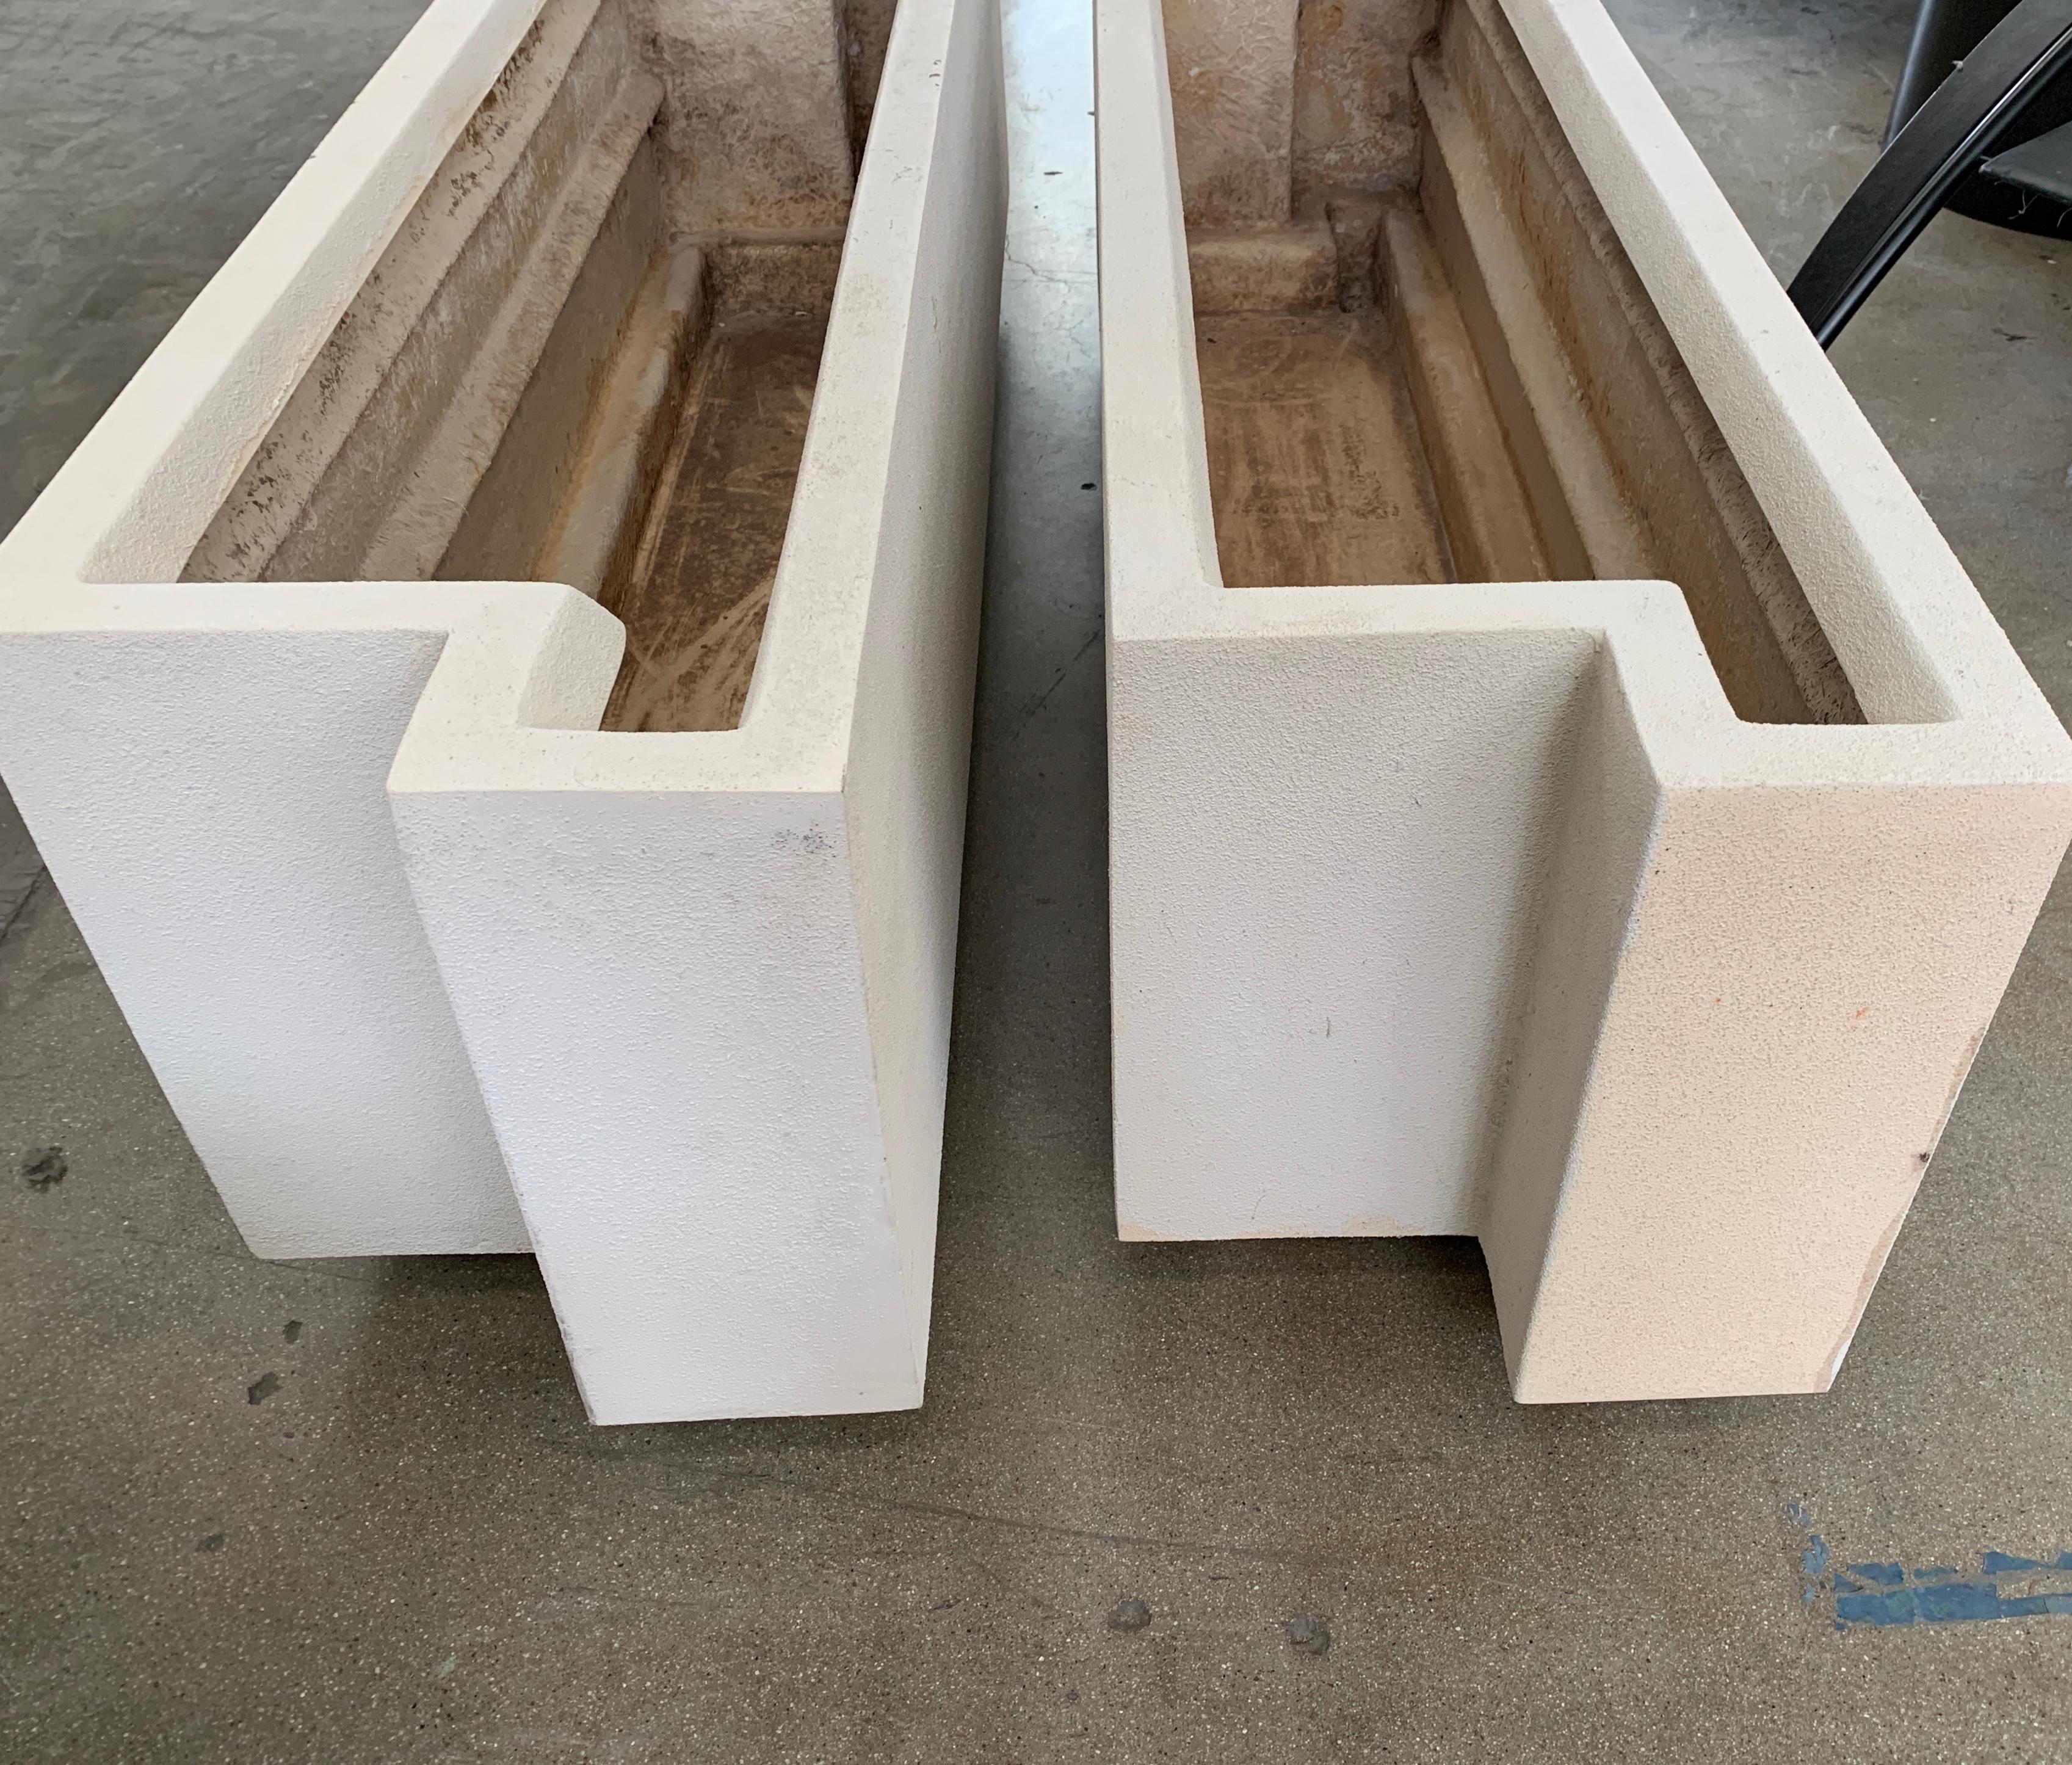 A nice pair of architectural outdoor planters. These are made of fiberglass and each have two drainage holes on one side. They have some age, and have minor losses and imperfections. There is some paint loss and chips, detailed in the photographs.